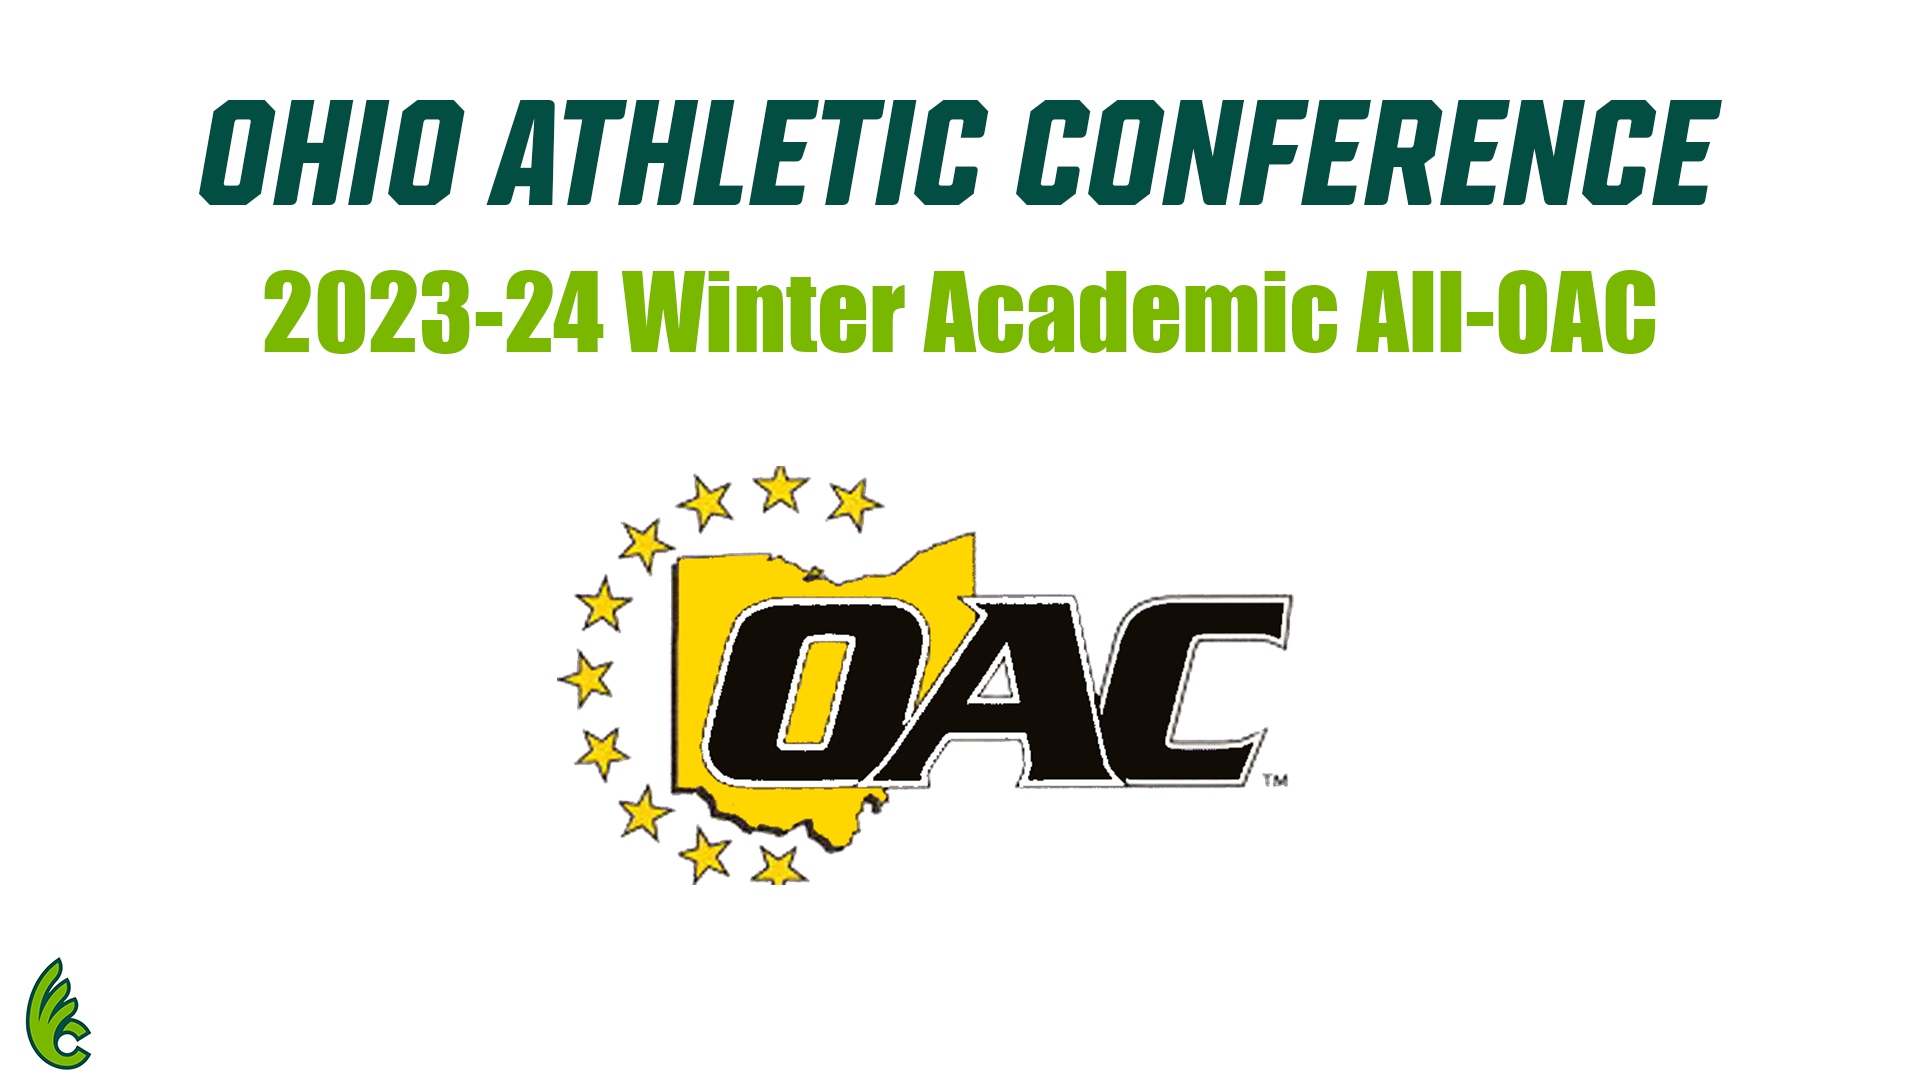 14 Quakers Recognized as Winter Academic All-OAC